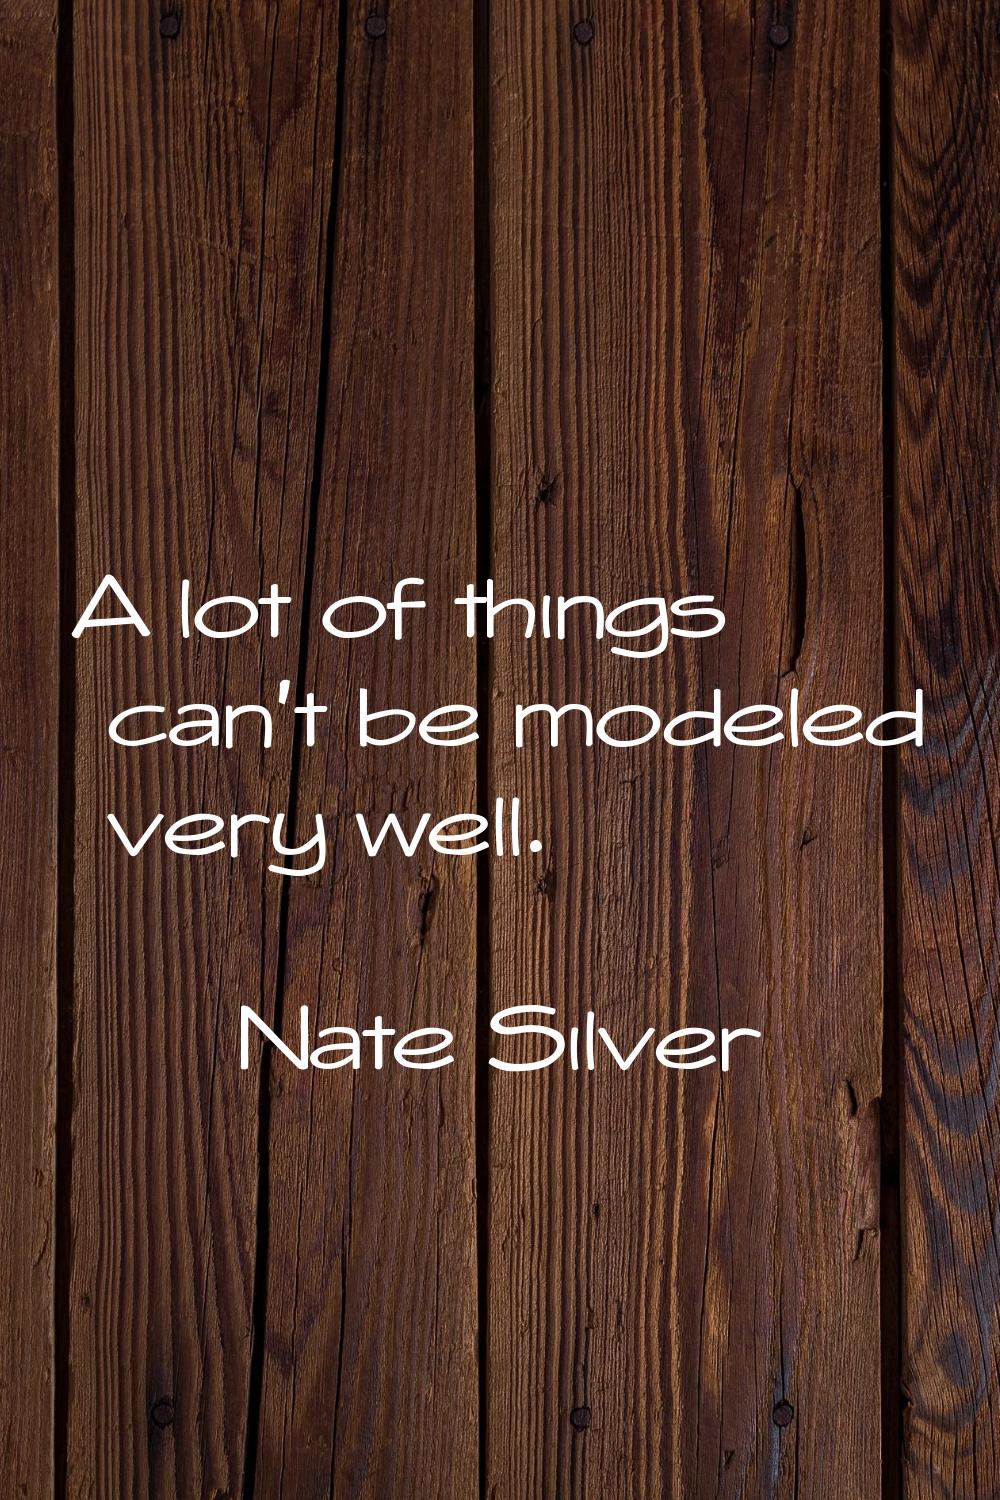 A lot of things can't be modeled very well.